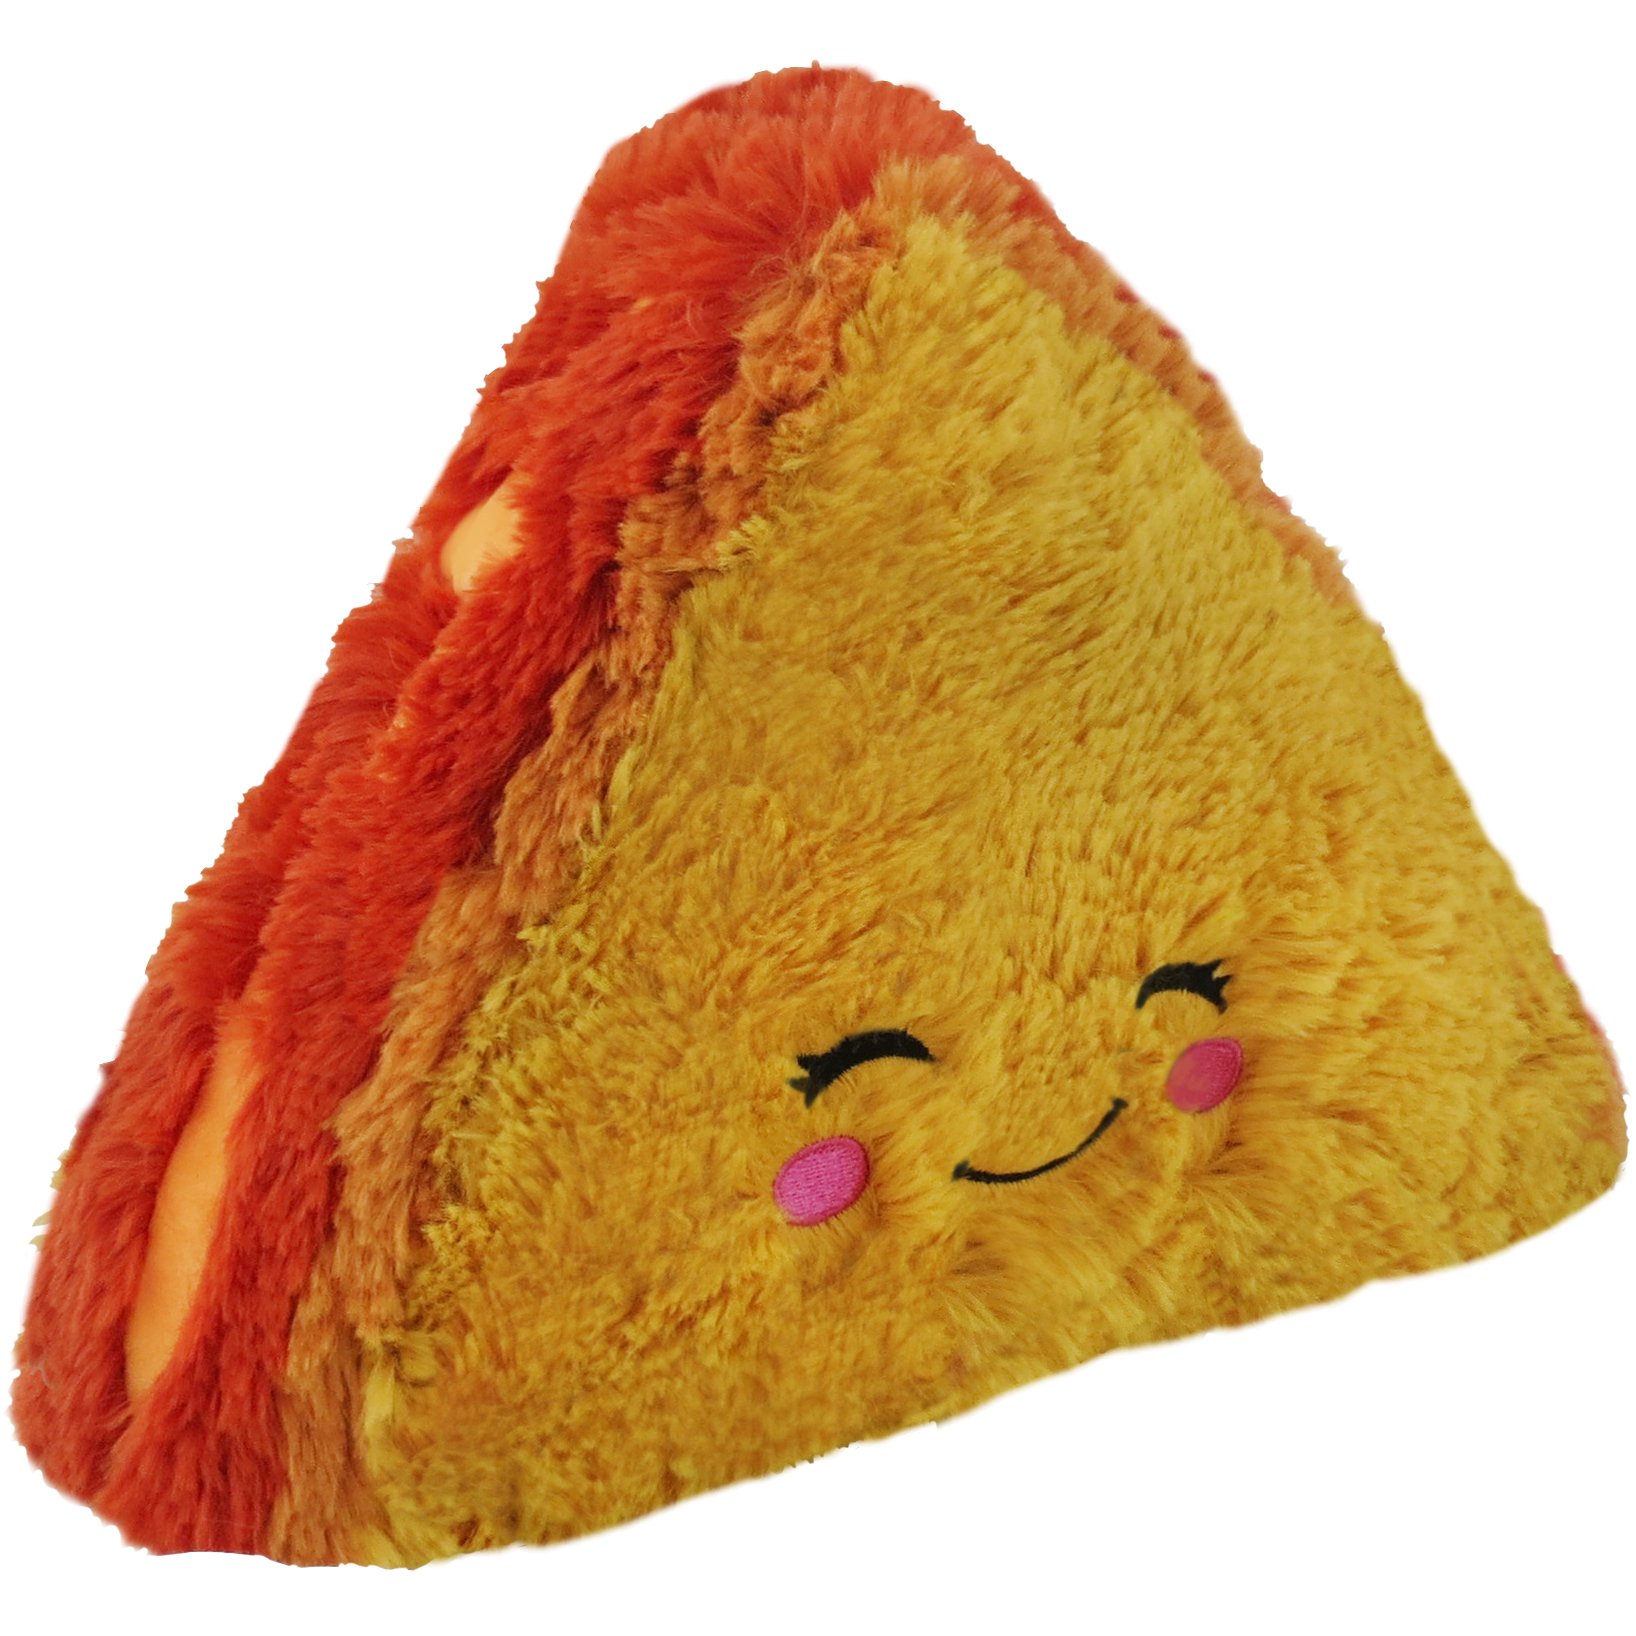 Book Cover Squishable / Mini Grilled Cheese Plush 7